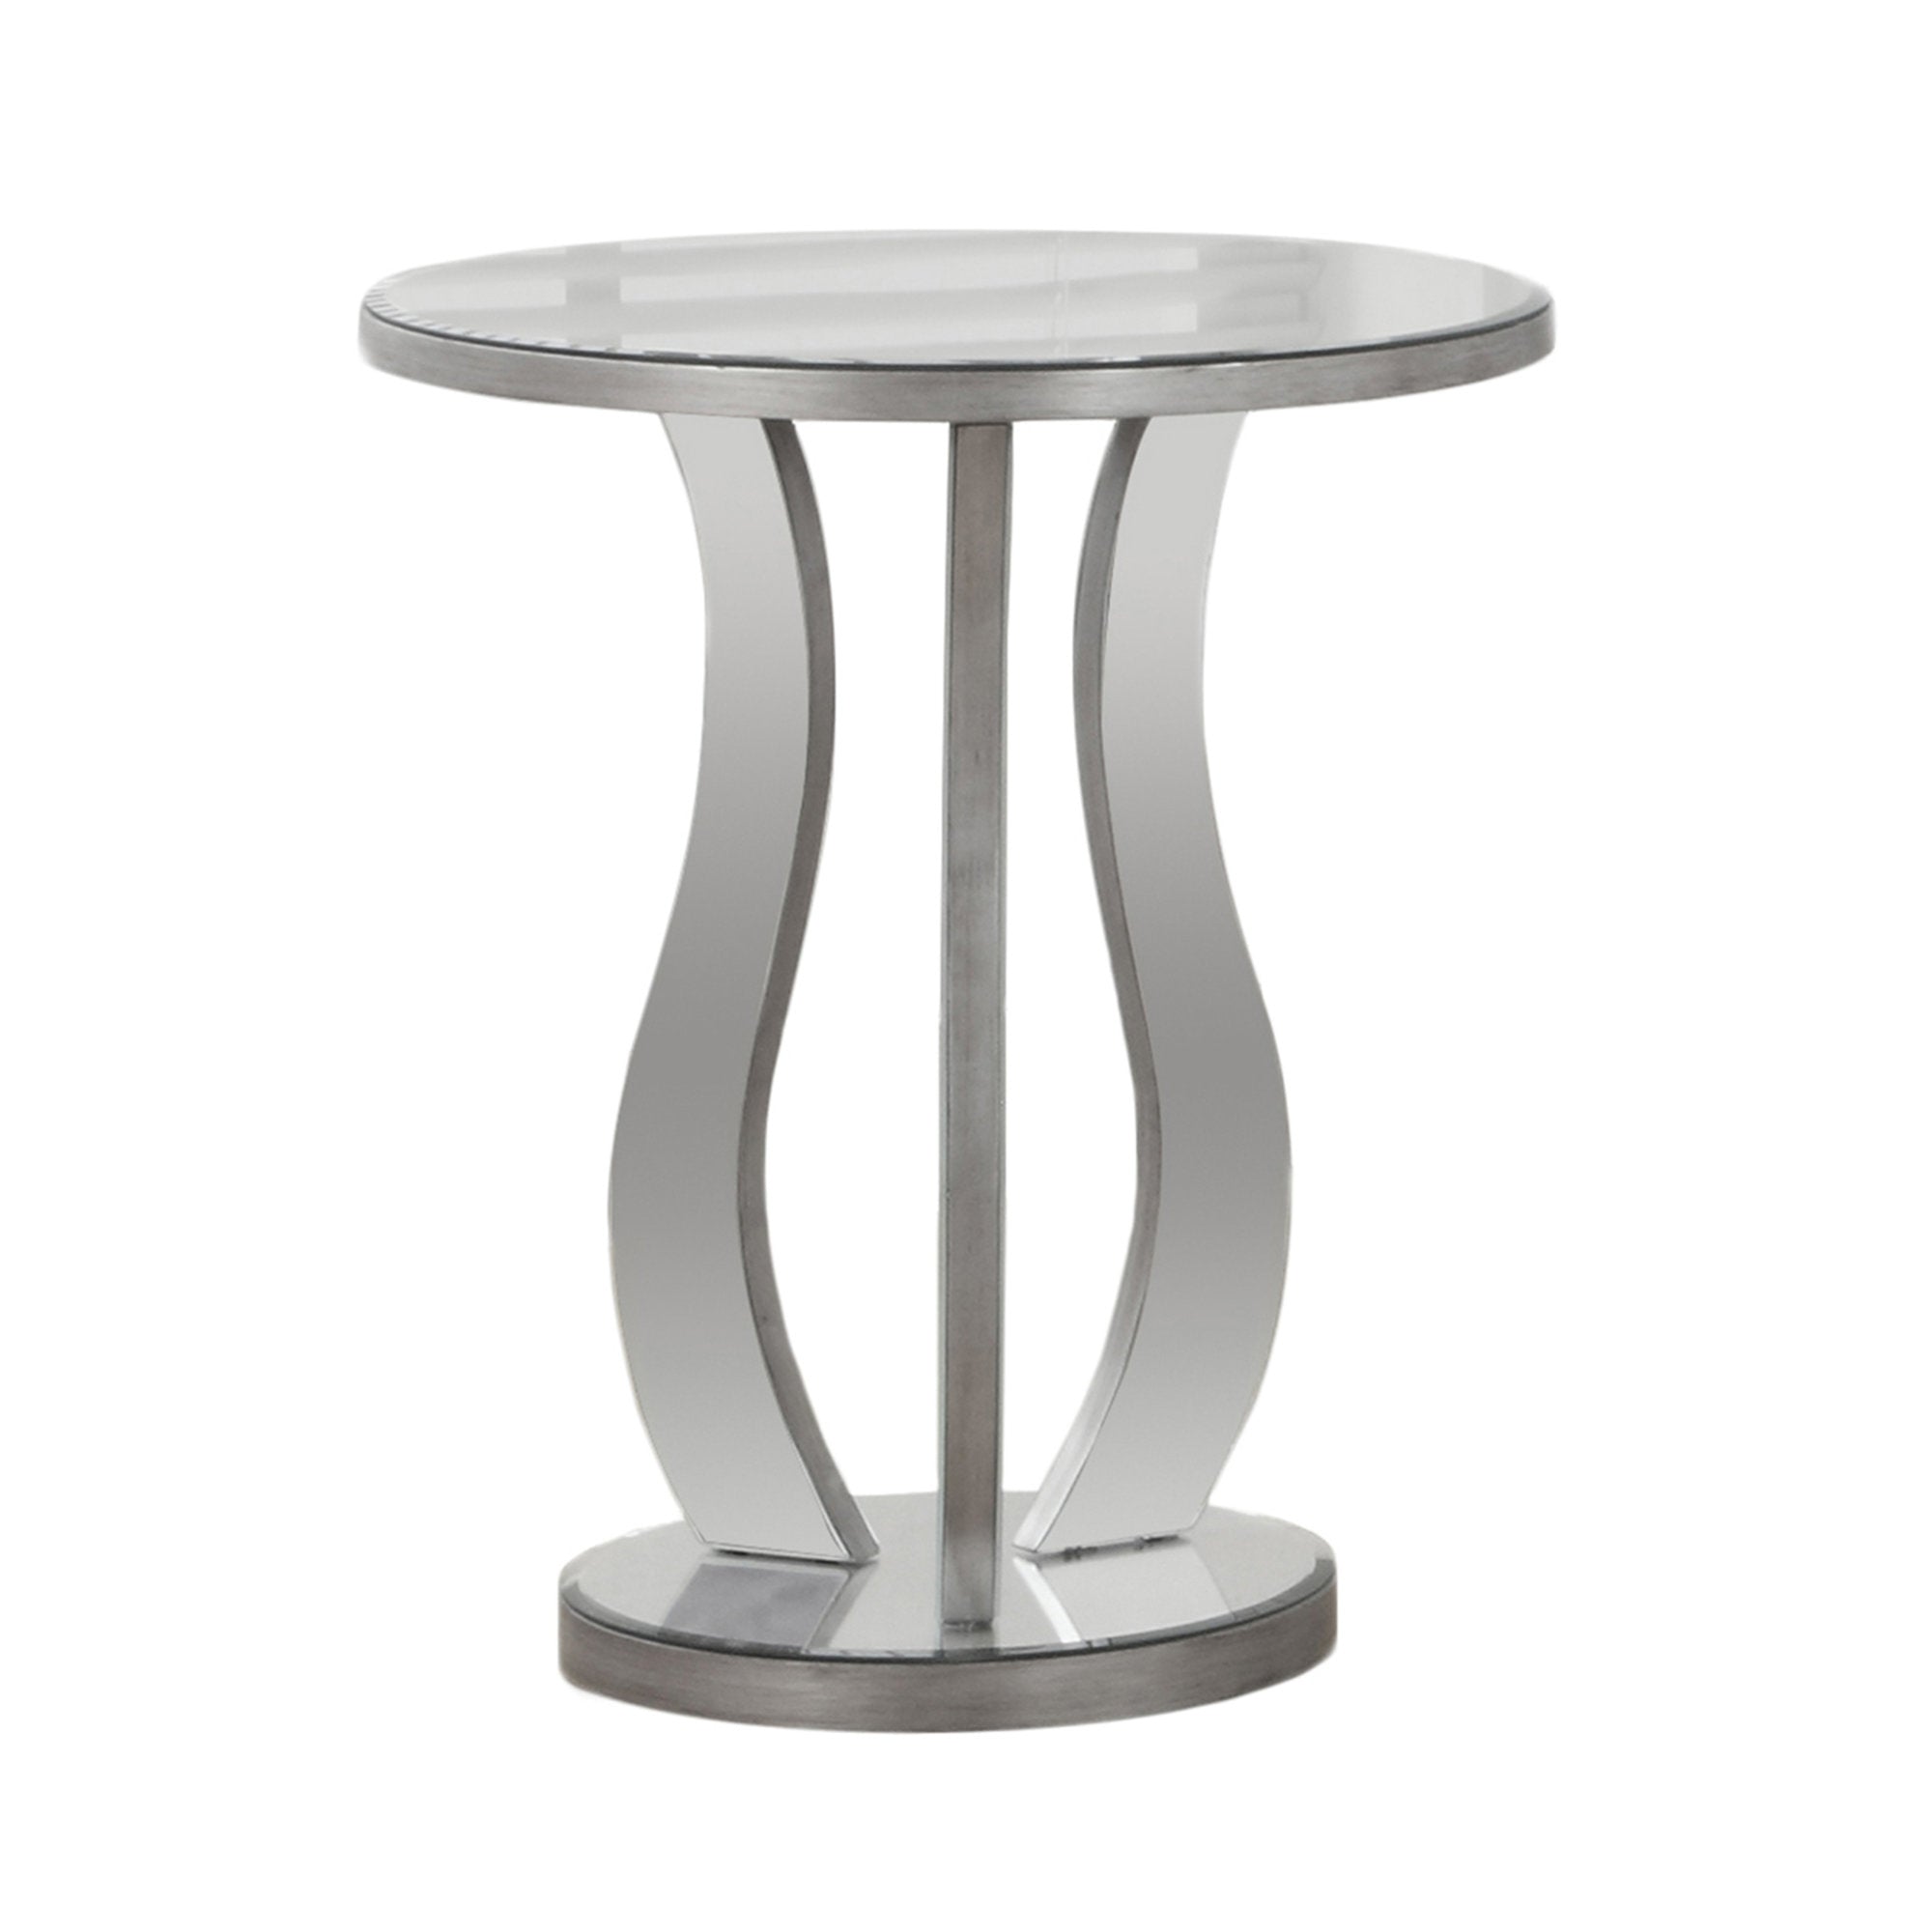 MN-333726    Accent Table, Side, End, Nightstand, Lamp, Living Room, Bedroom, Mirror, Wooden Frame, Brushed Silver, Grey, Contemporary, Modern